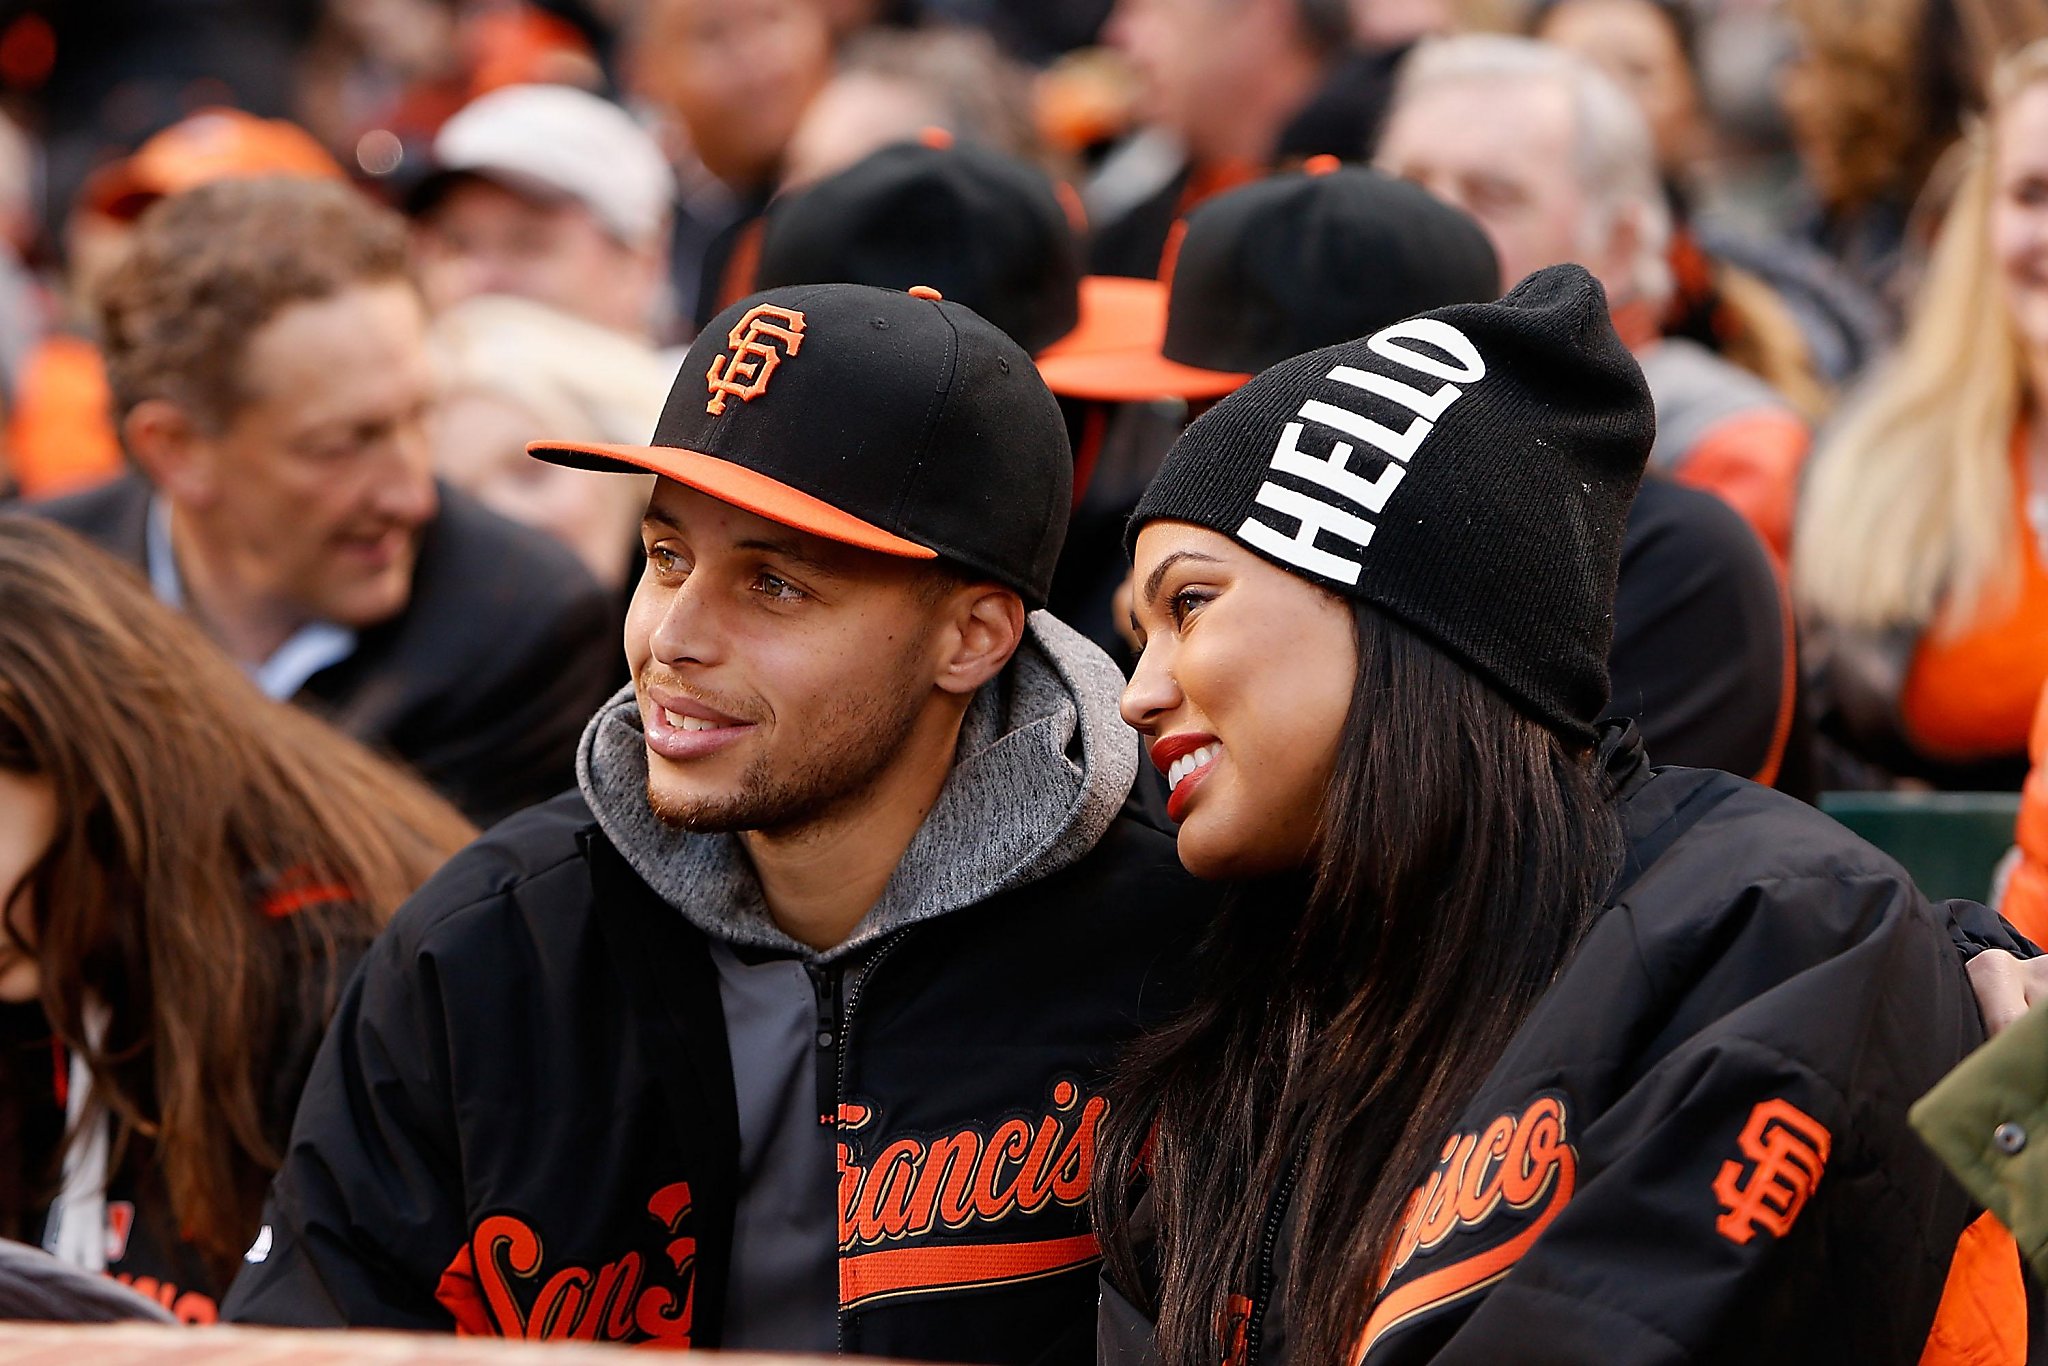 Ayesha Curry Admits She Hates How Friendly Steph Curry Is With Female Fans, News